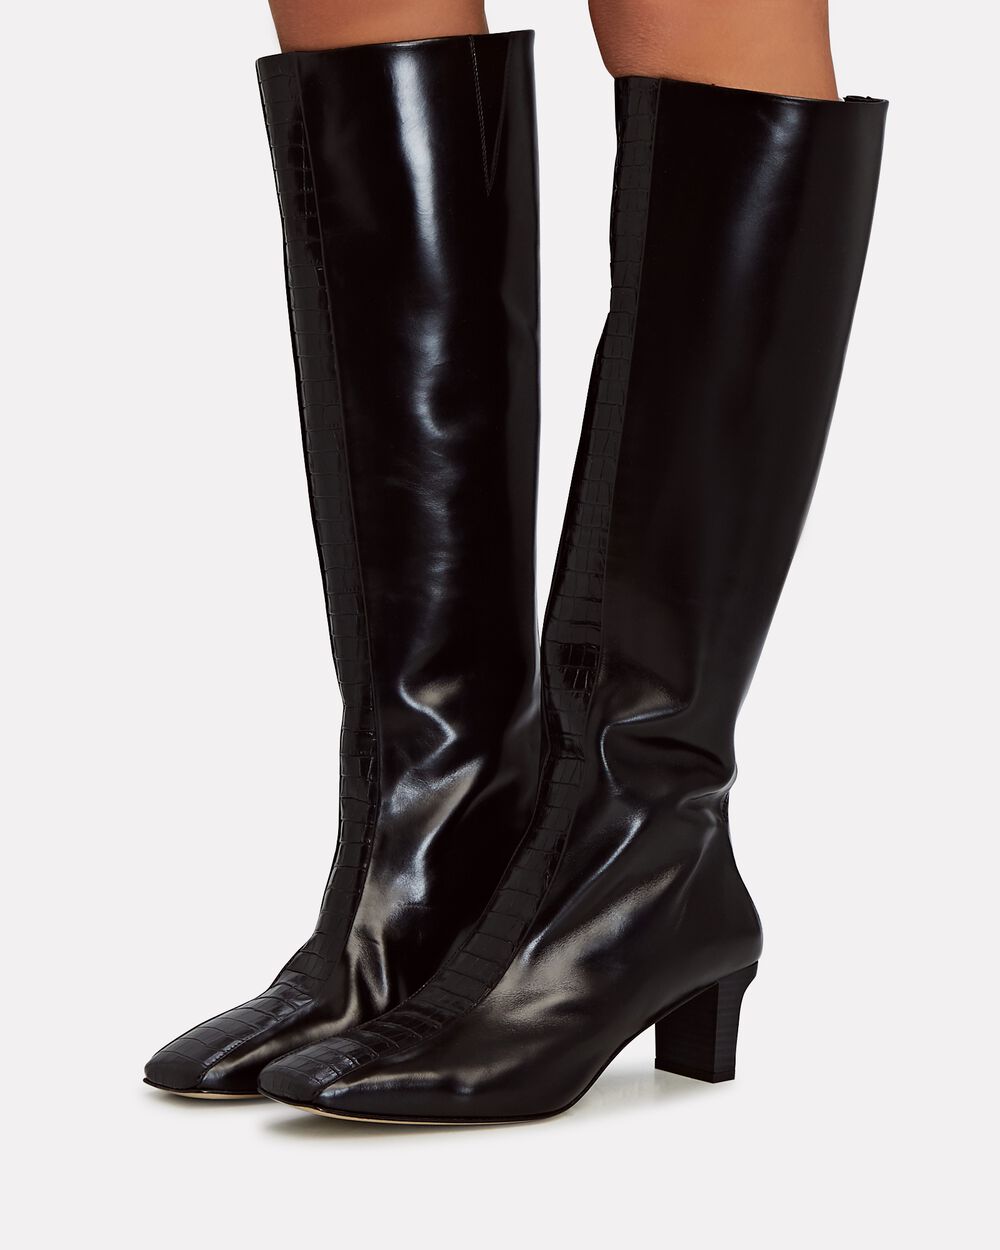 Aeyde Ophelia Leather Knee-High Boots | INTERMIX®